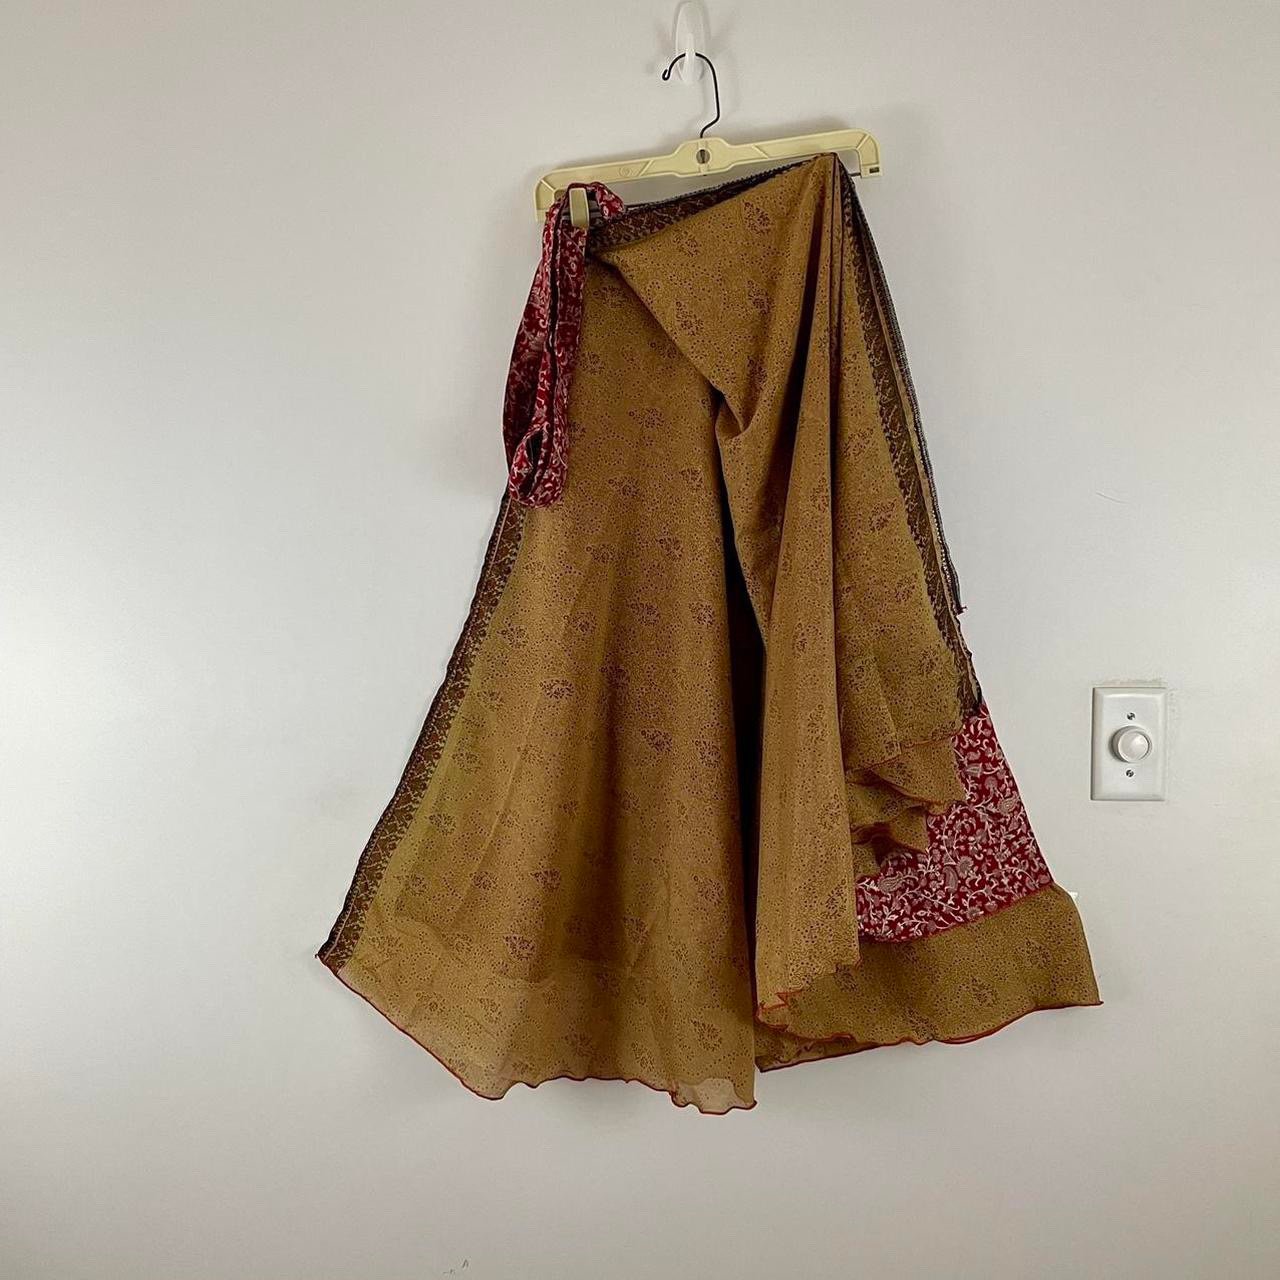 Personality Reversible Upcycled Magic Wrap Skirt BIN300 N3v4YnTl0 Low Price